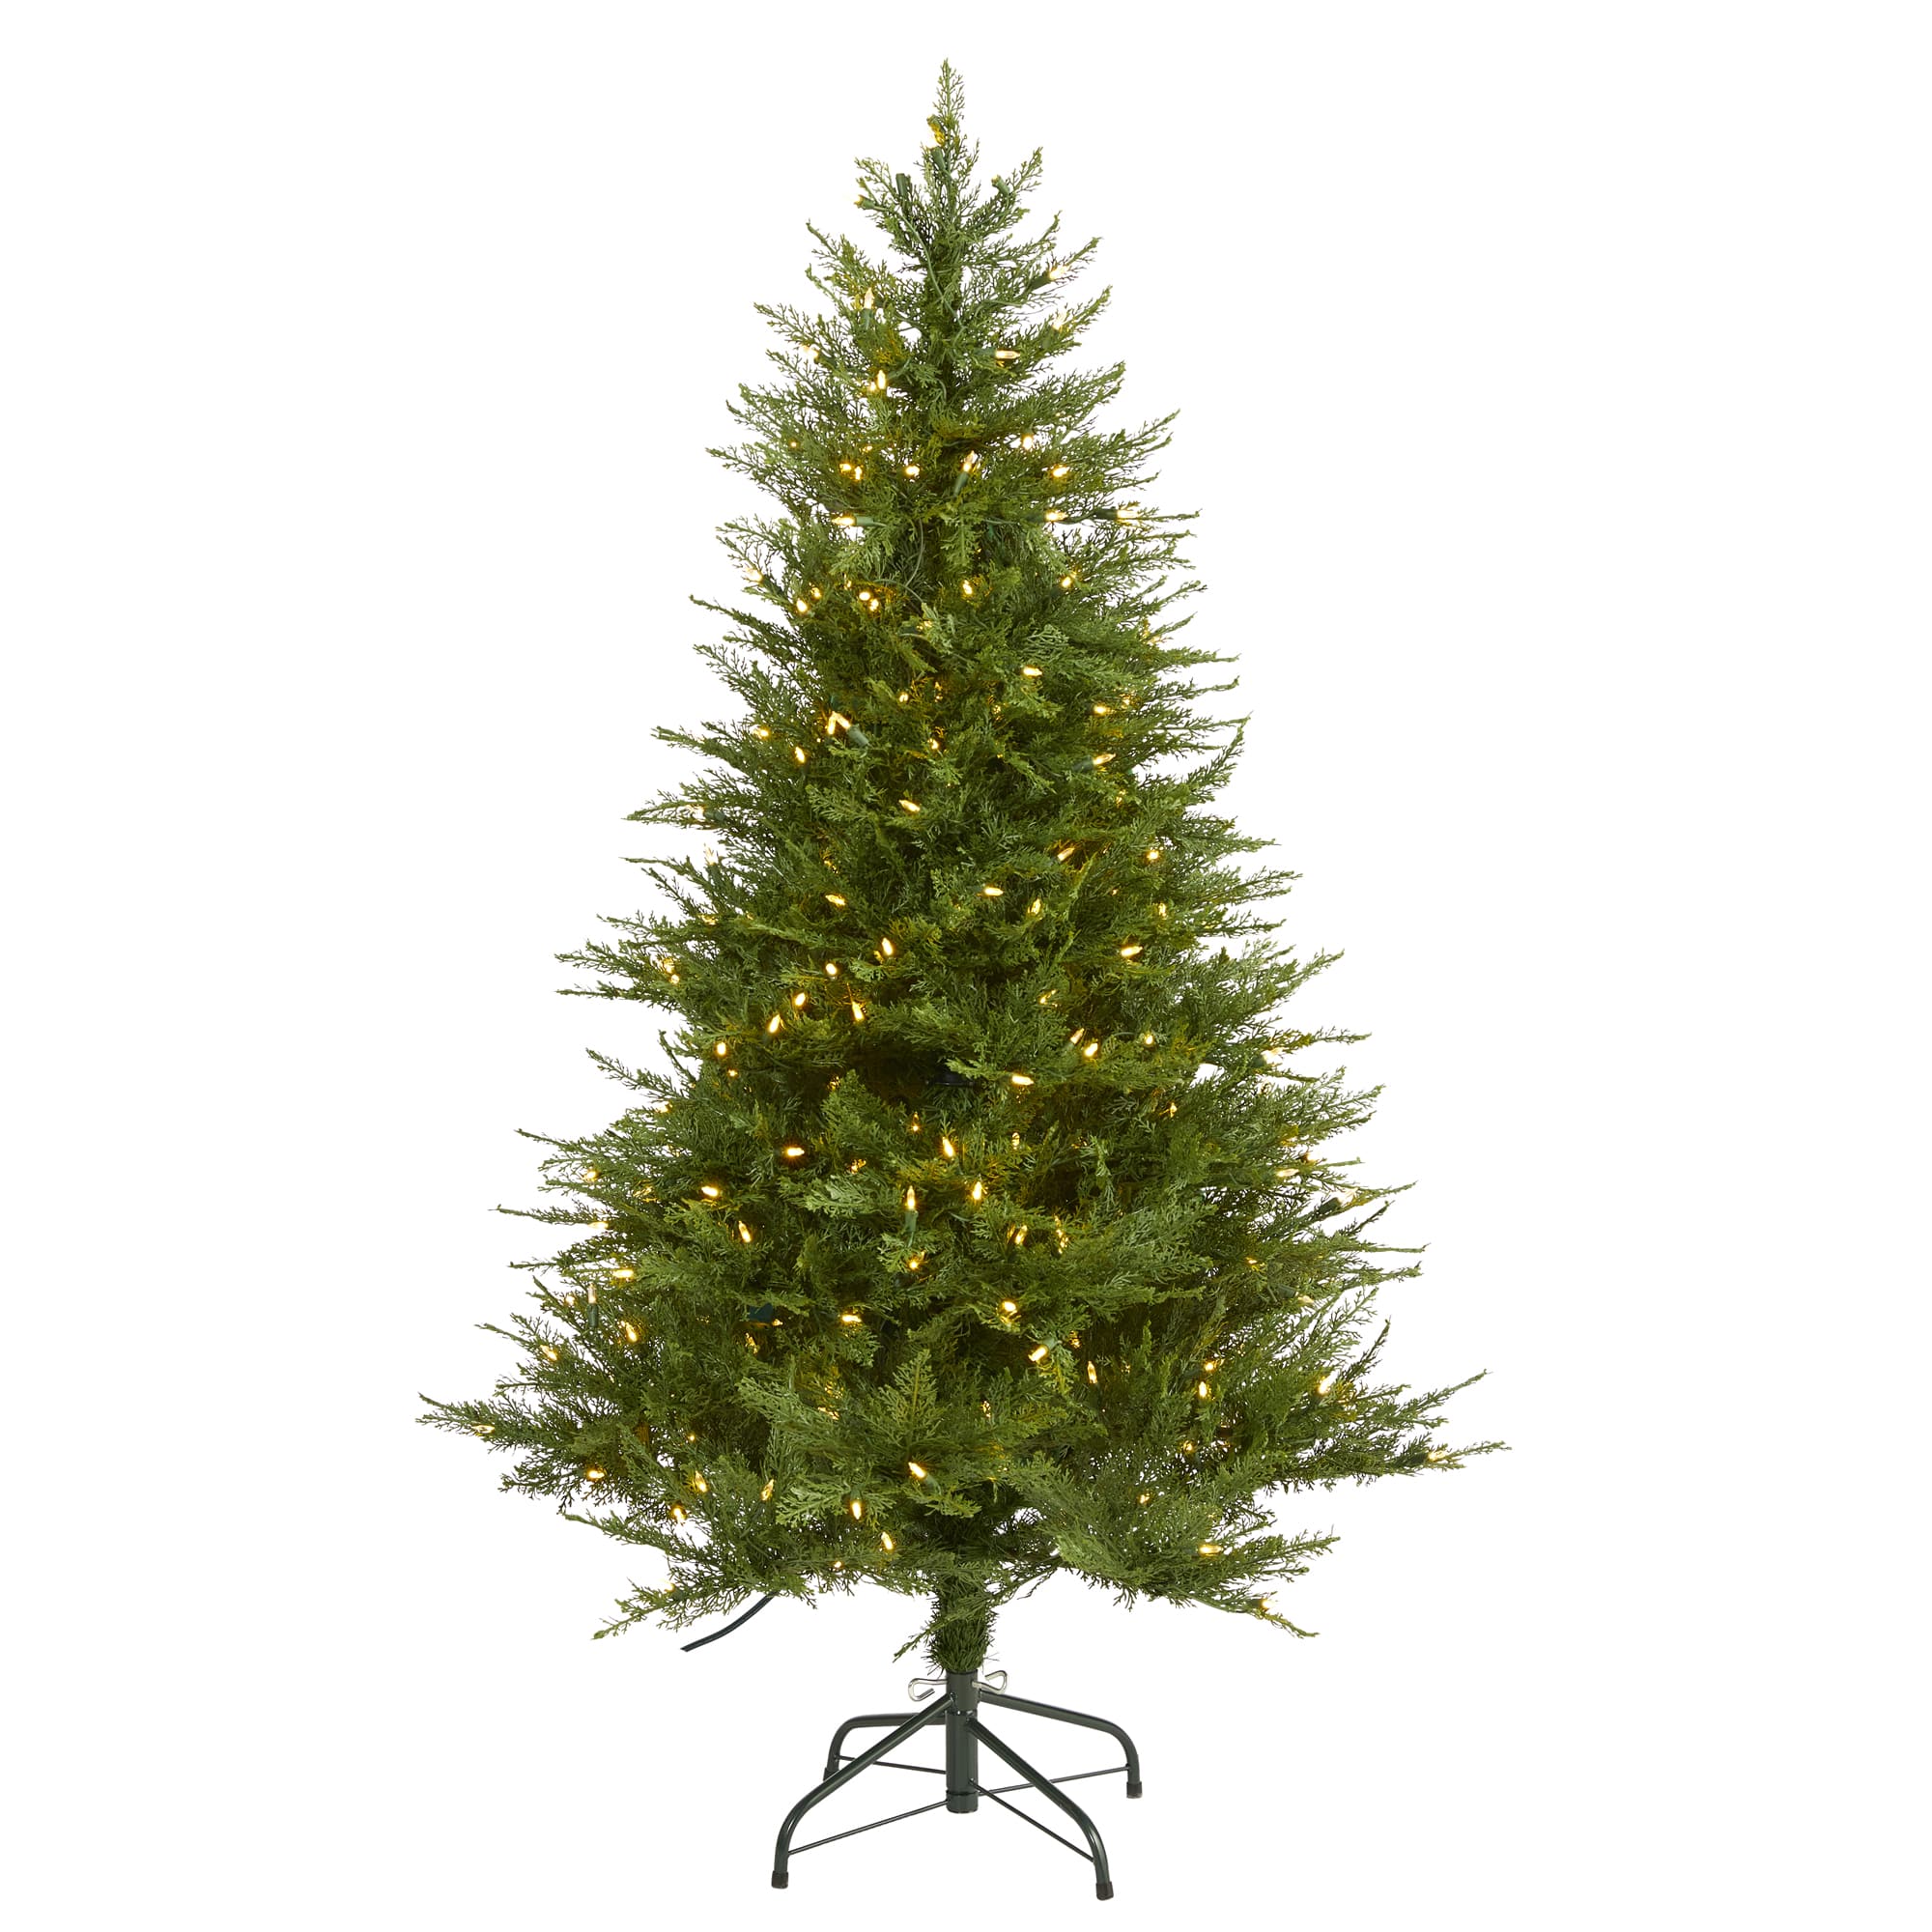 5ft. Pre-Lit Wisconsin Fir Artificial Christmas Tree, Warm White LED Lights